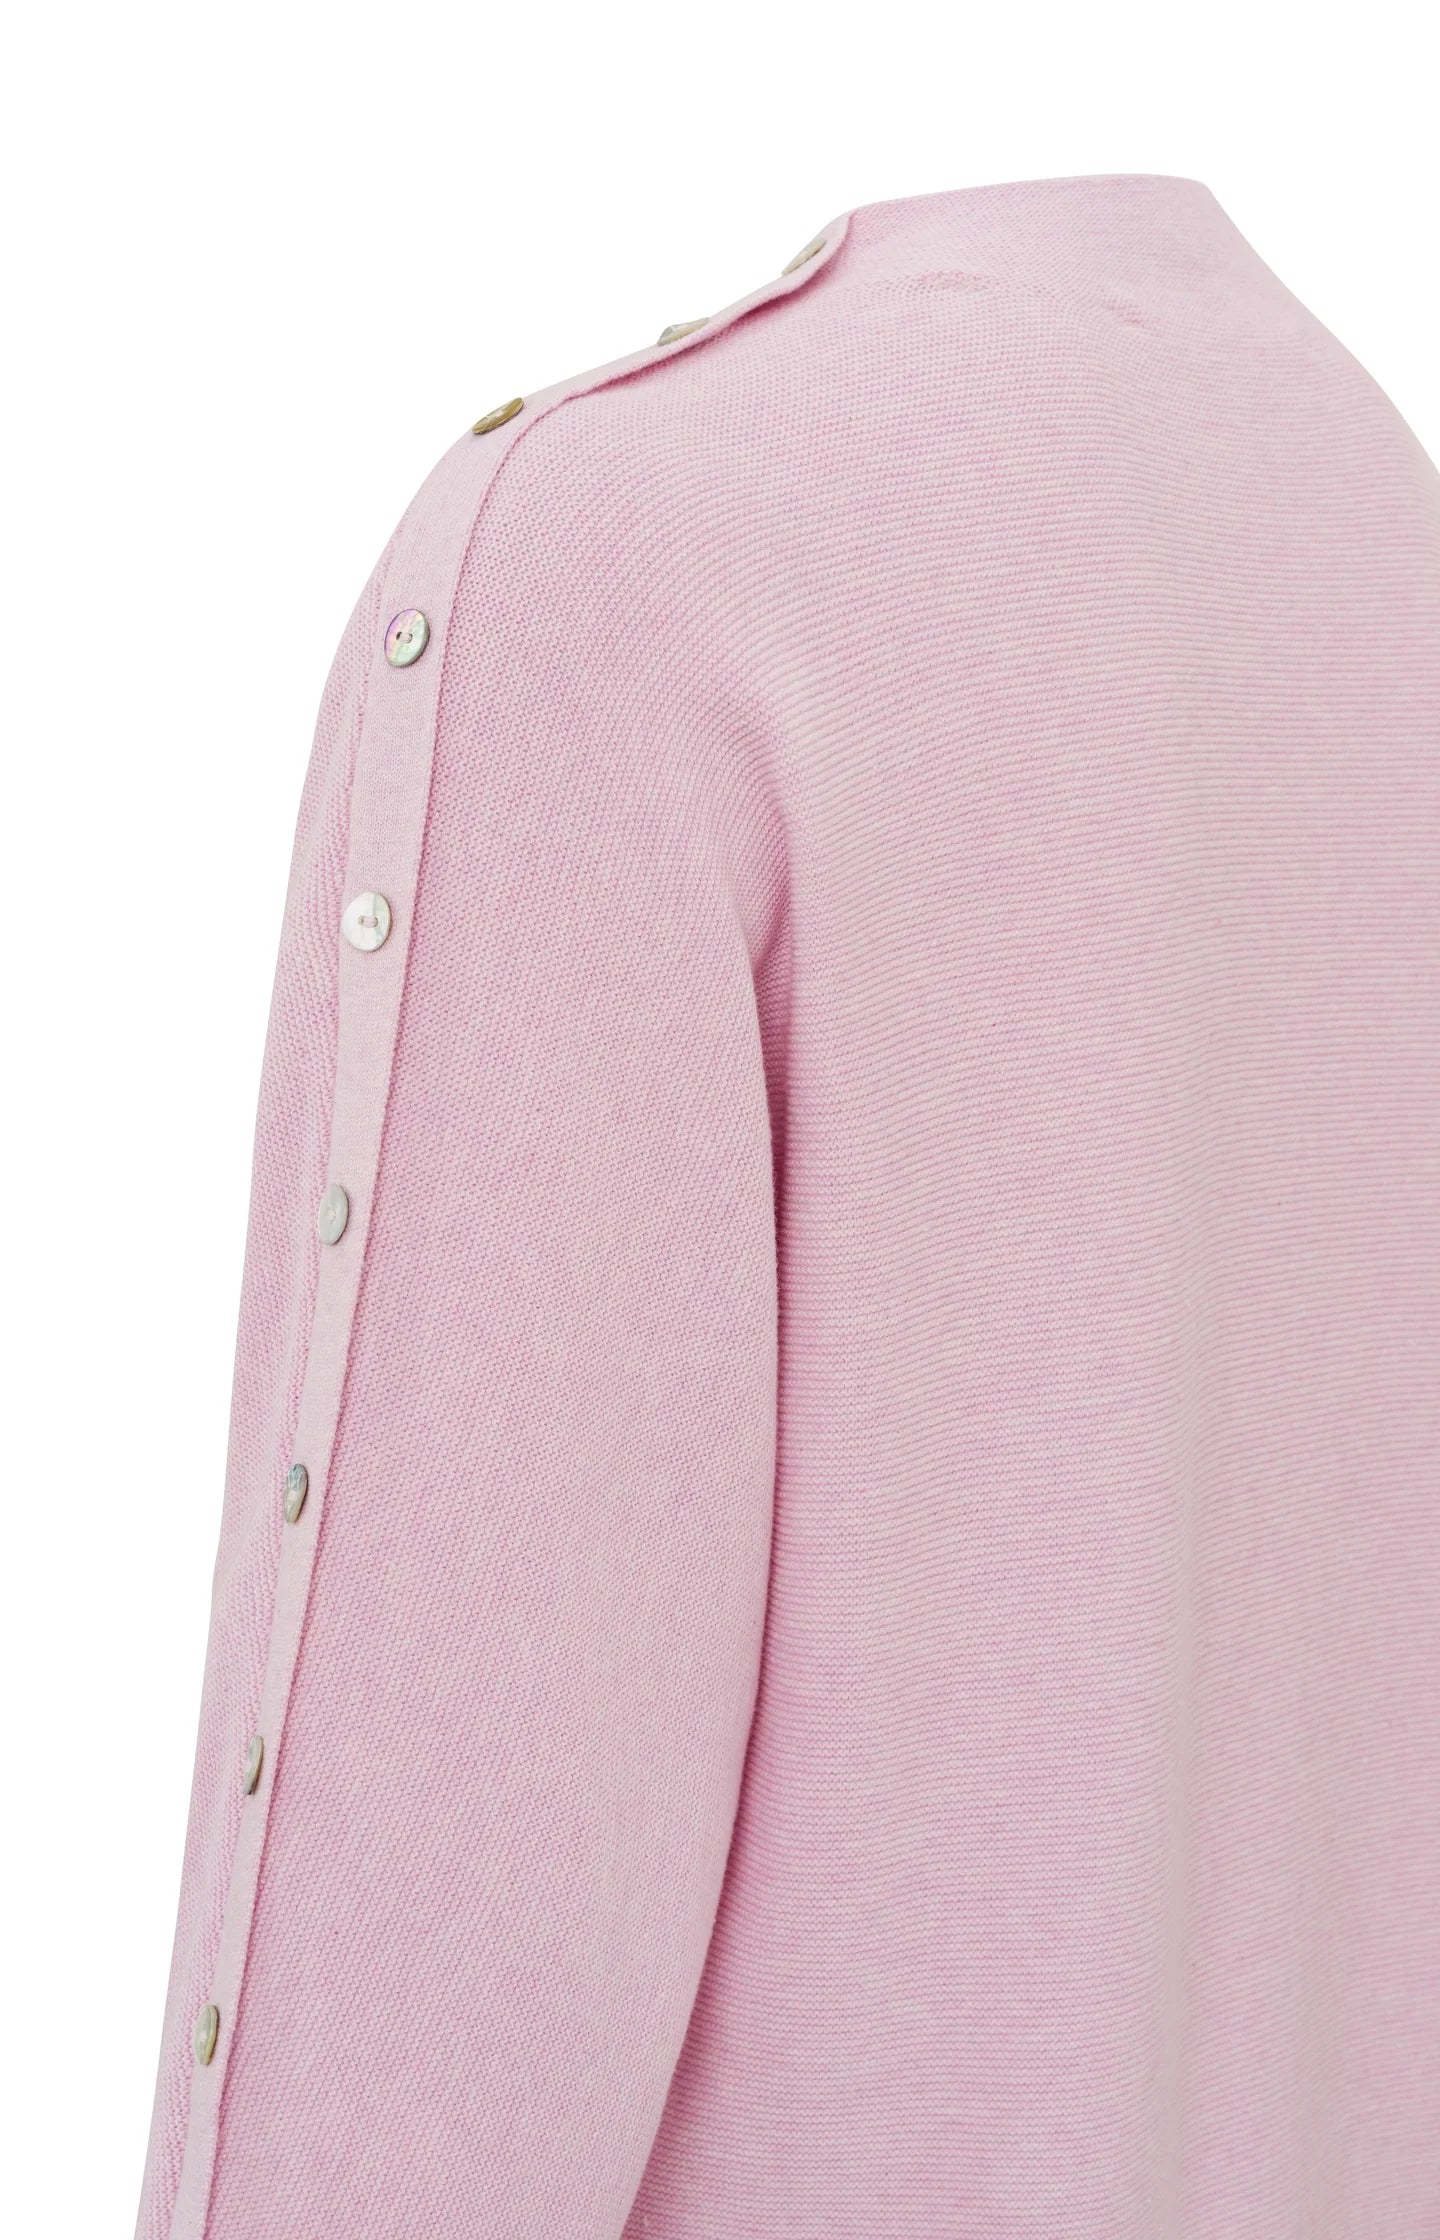 Yaya Sweater with boatneck, long sleeves and button details Pink